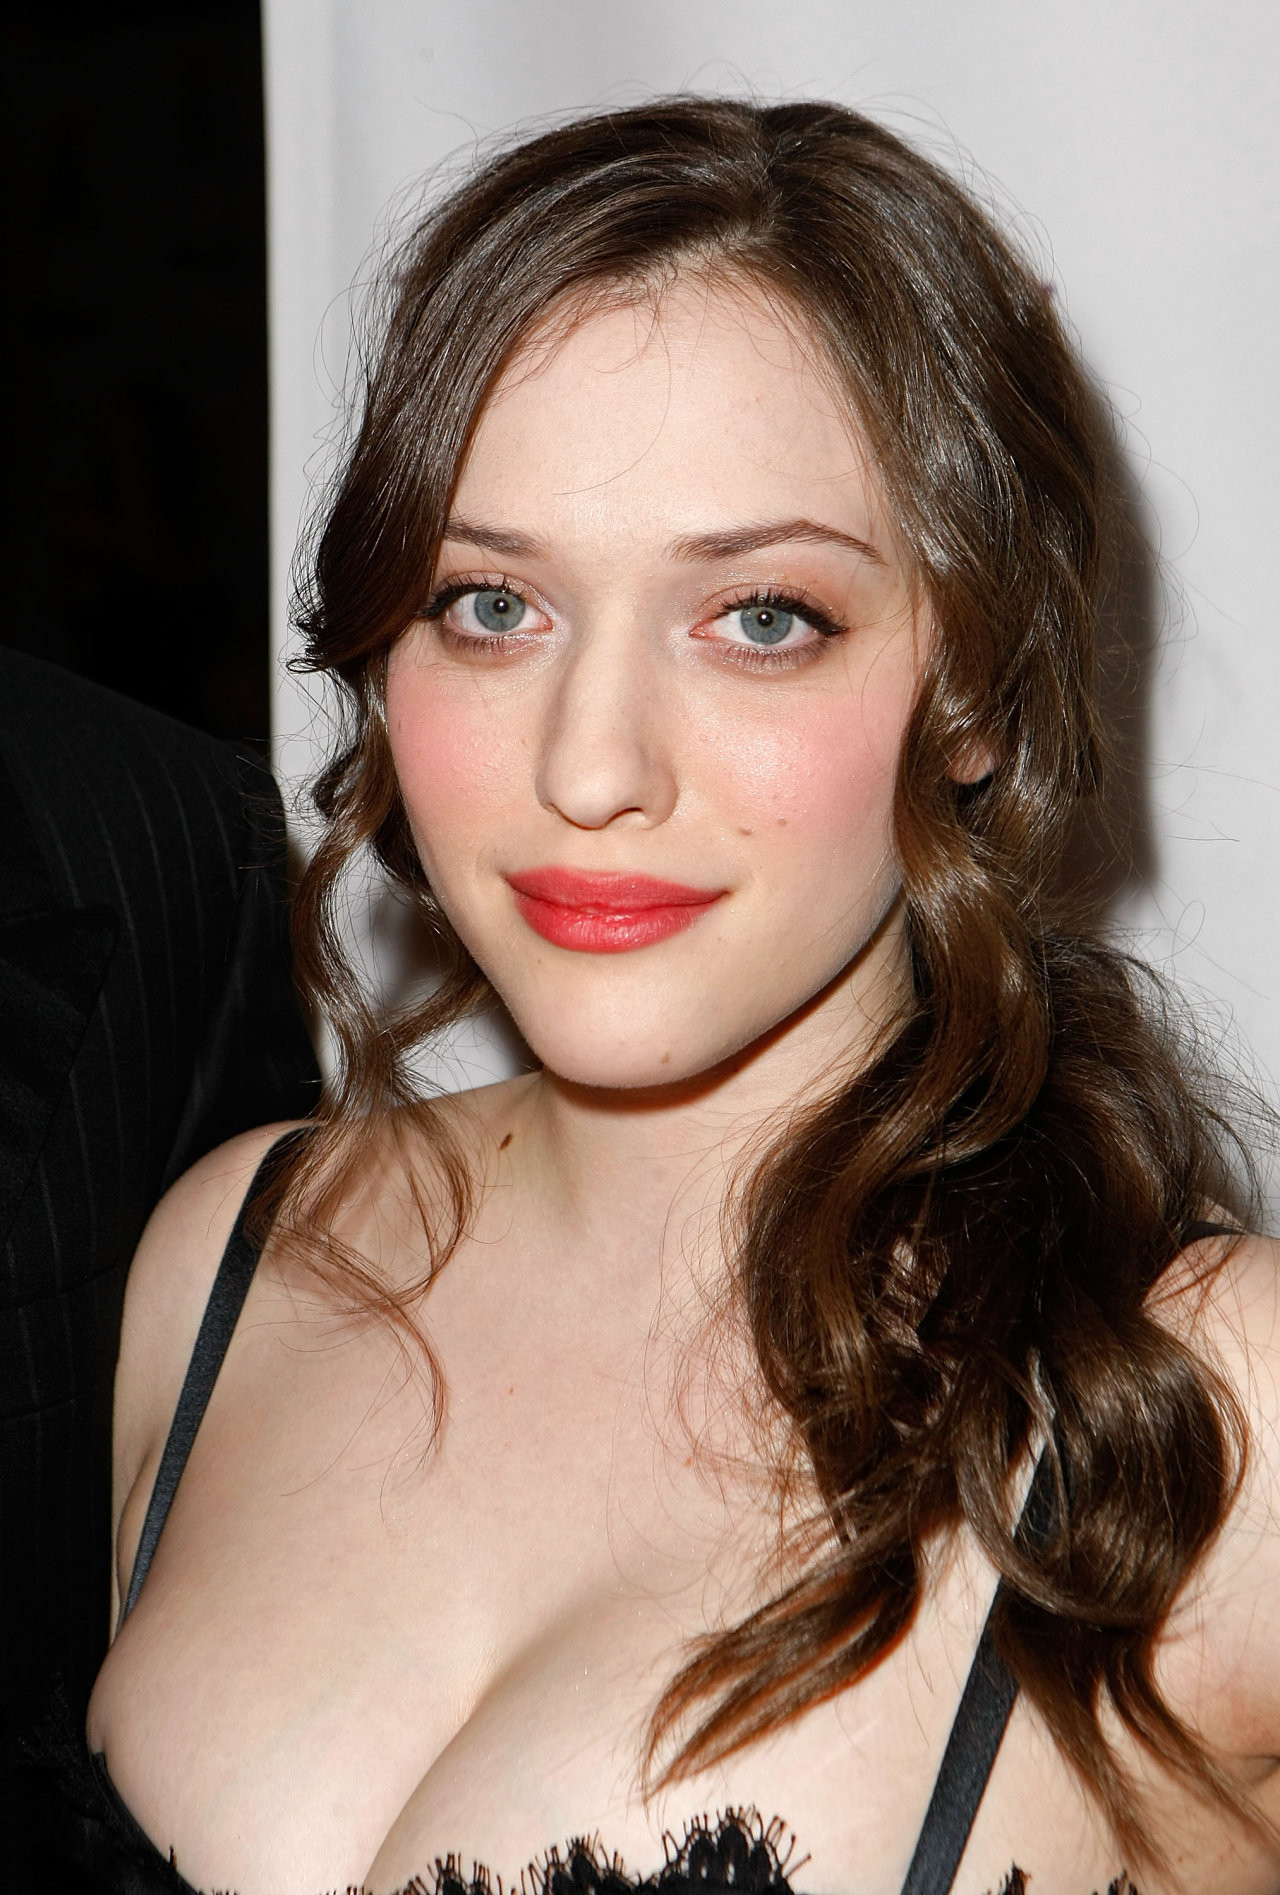 the-best-boobs:  southerntrapfan:  Since Tumblr is stupid and lame these are all I can post of the lovely but odd Kat Dennings    #the-best-boobs keeping boobs on tumblr